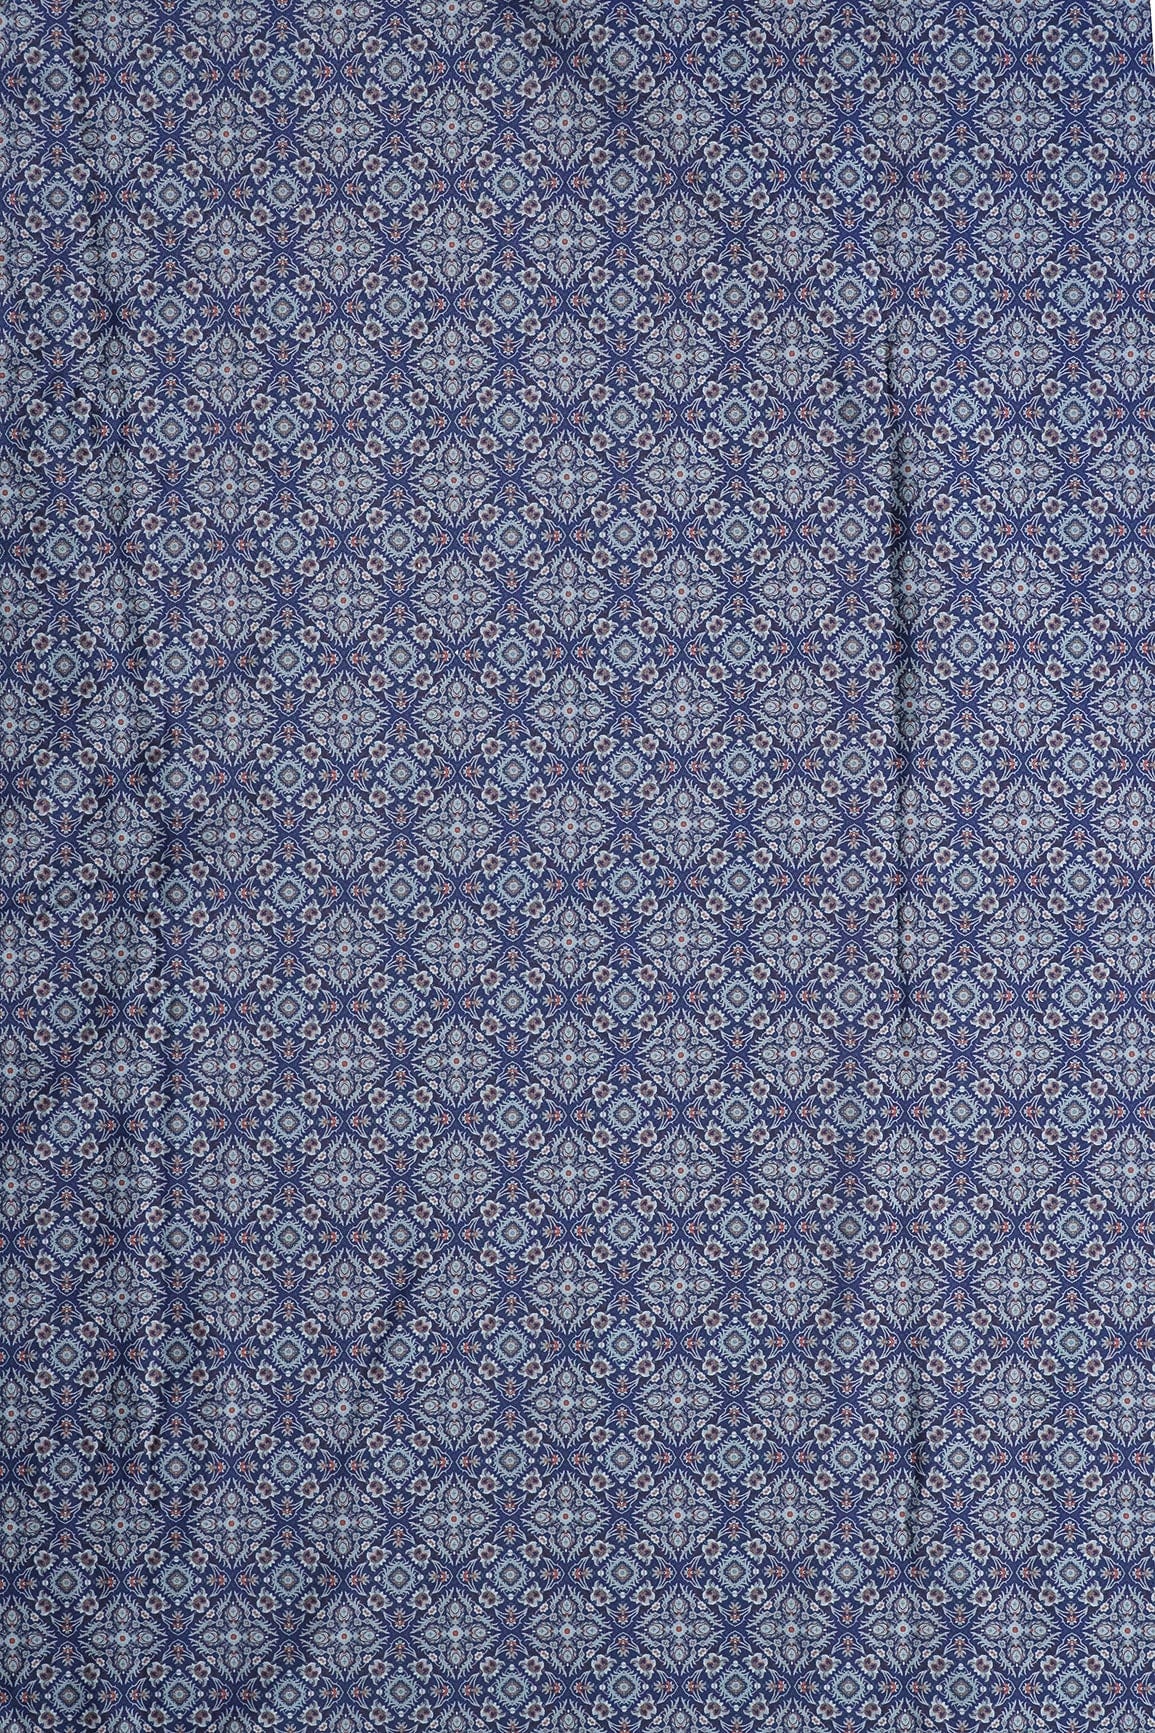 doeraa Prints Grey And Orange Traditional Pattern Digital Print On Royal Blue French Crepe Fabric